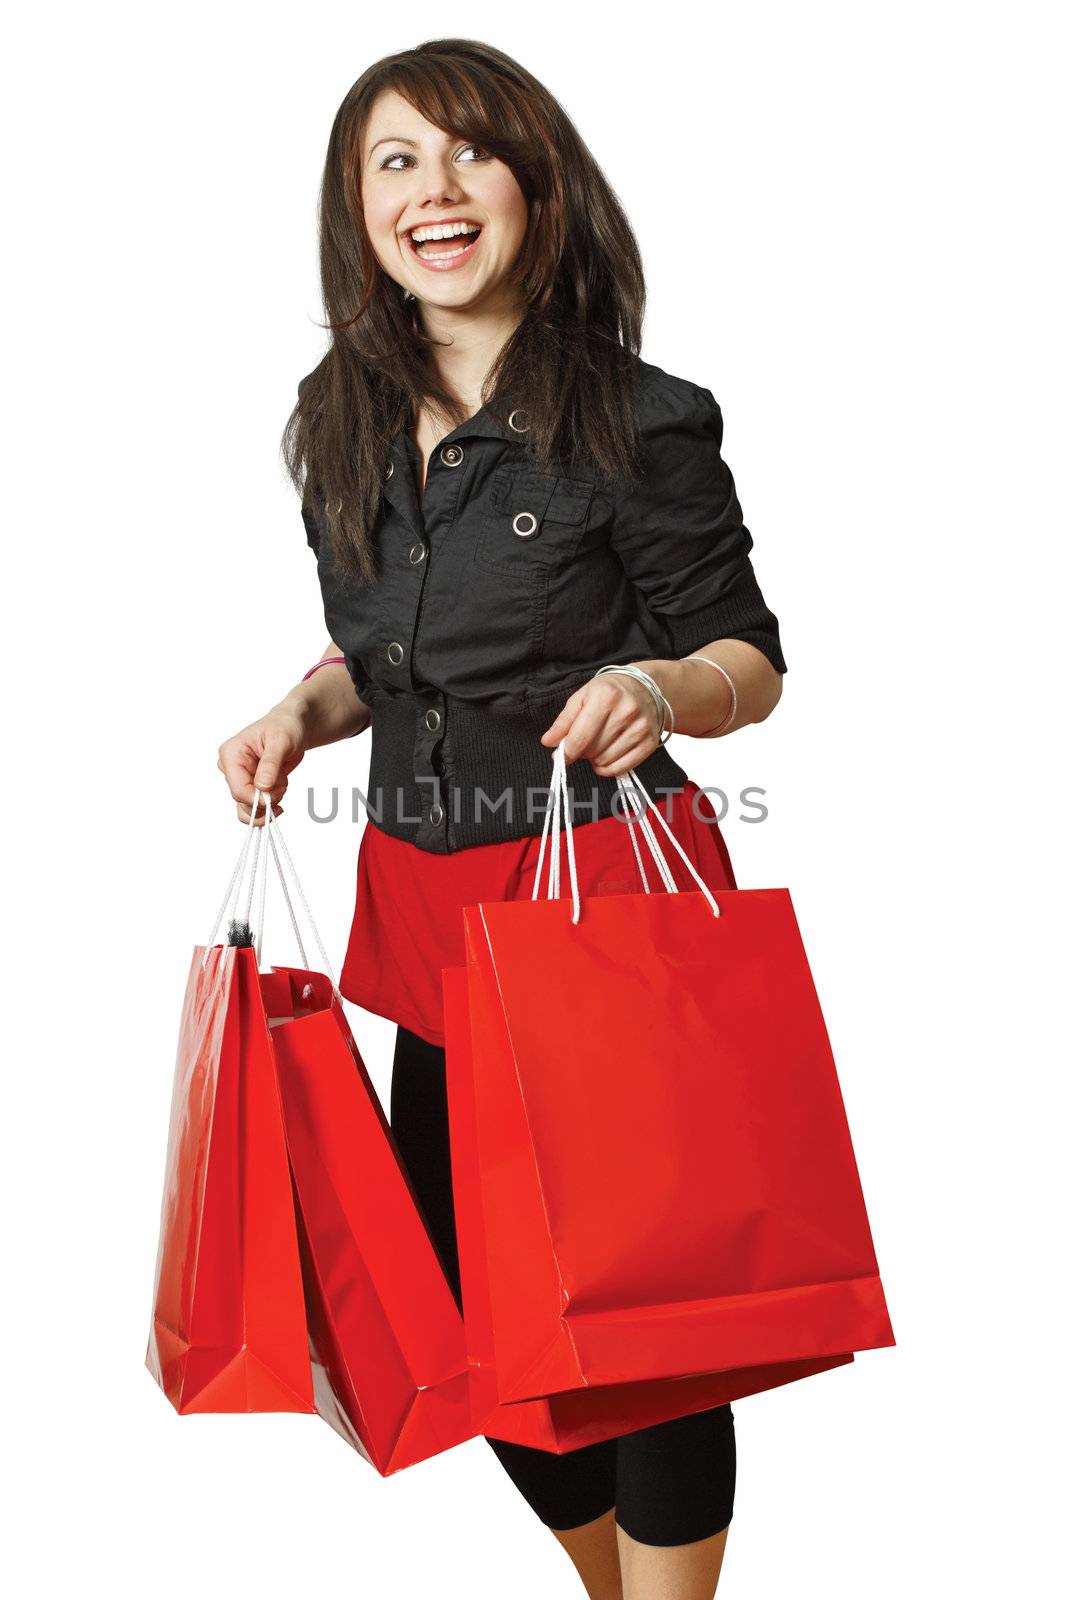 Very happy shopping girl by sumners